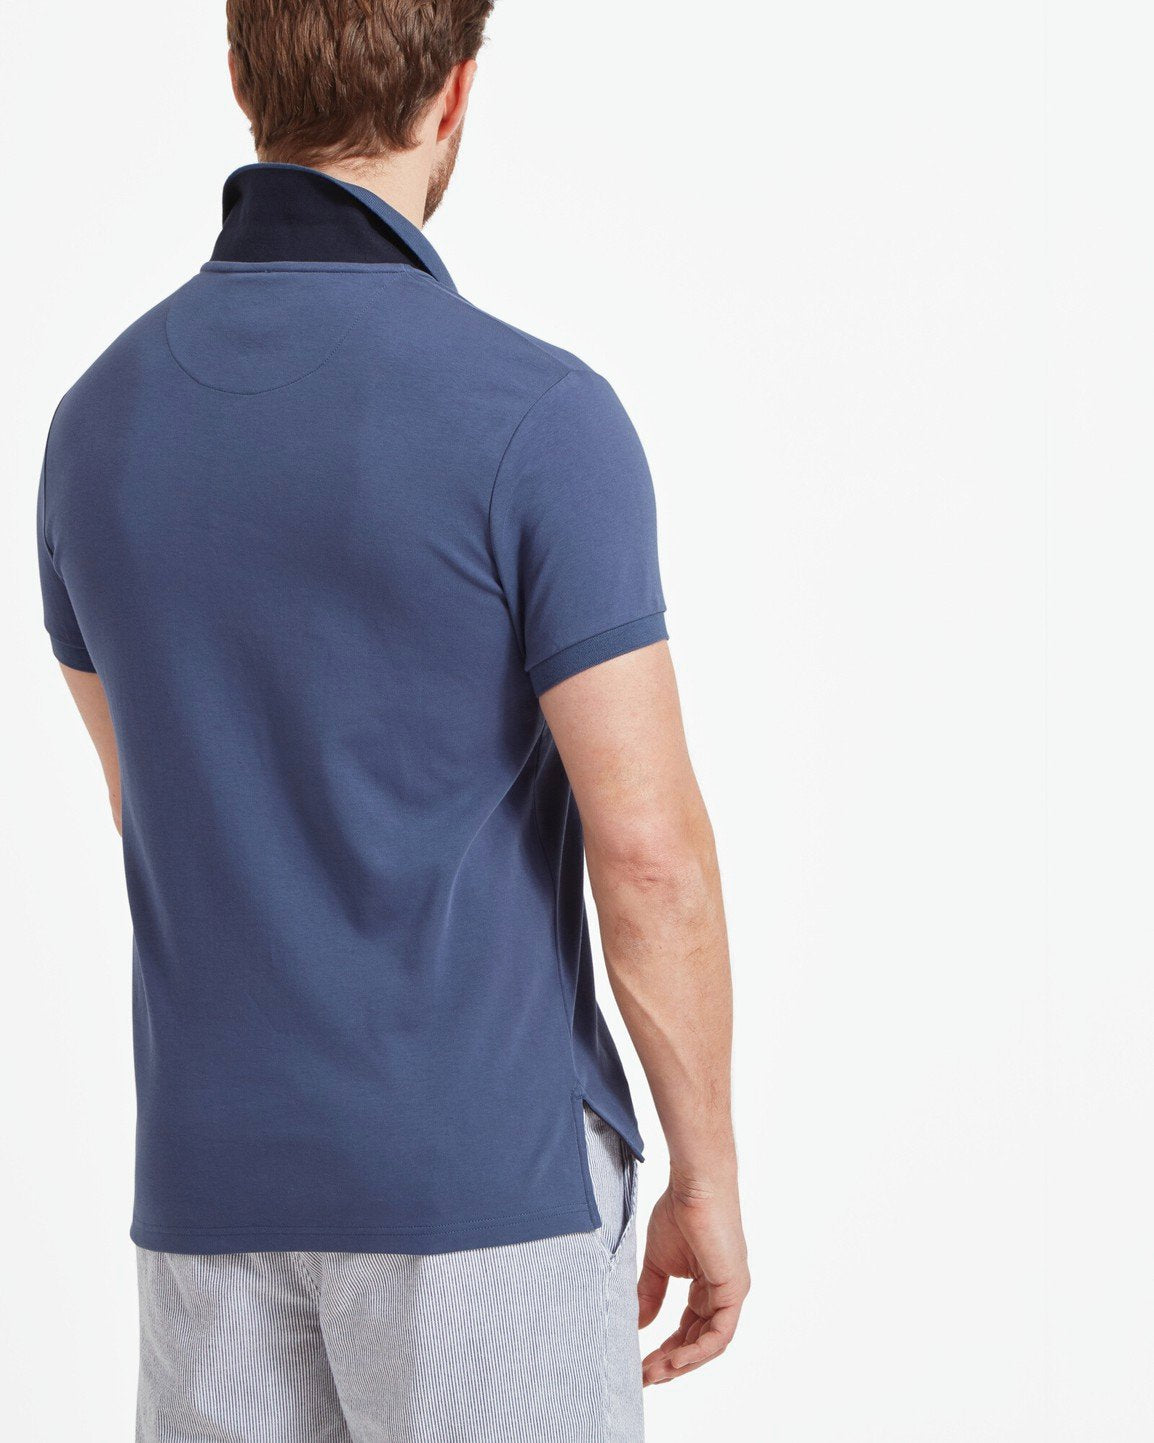 St Ives Jersey Polo Shirt French Navy